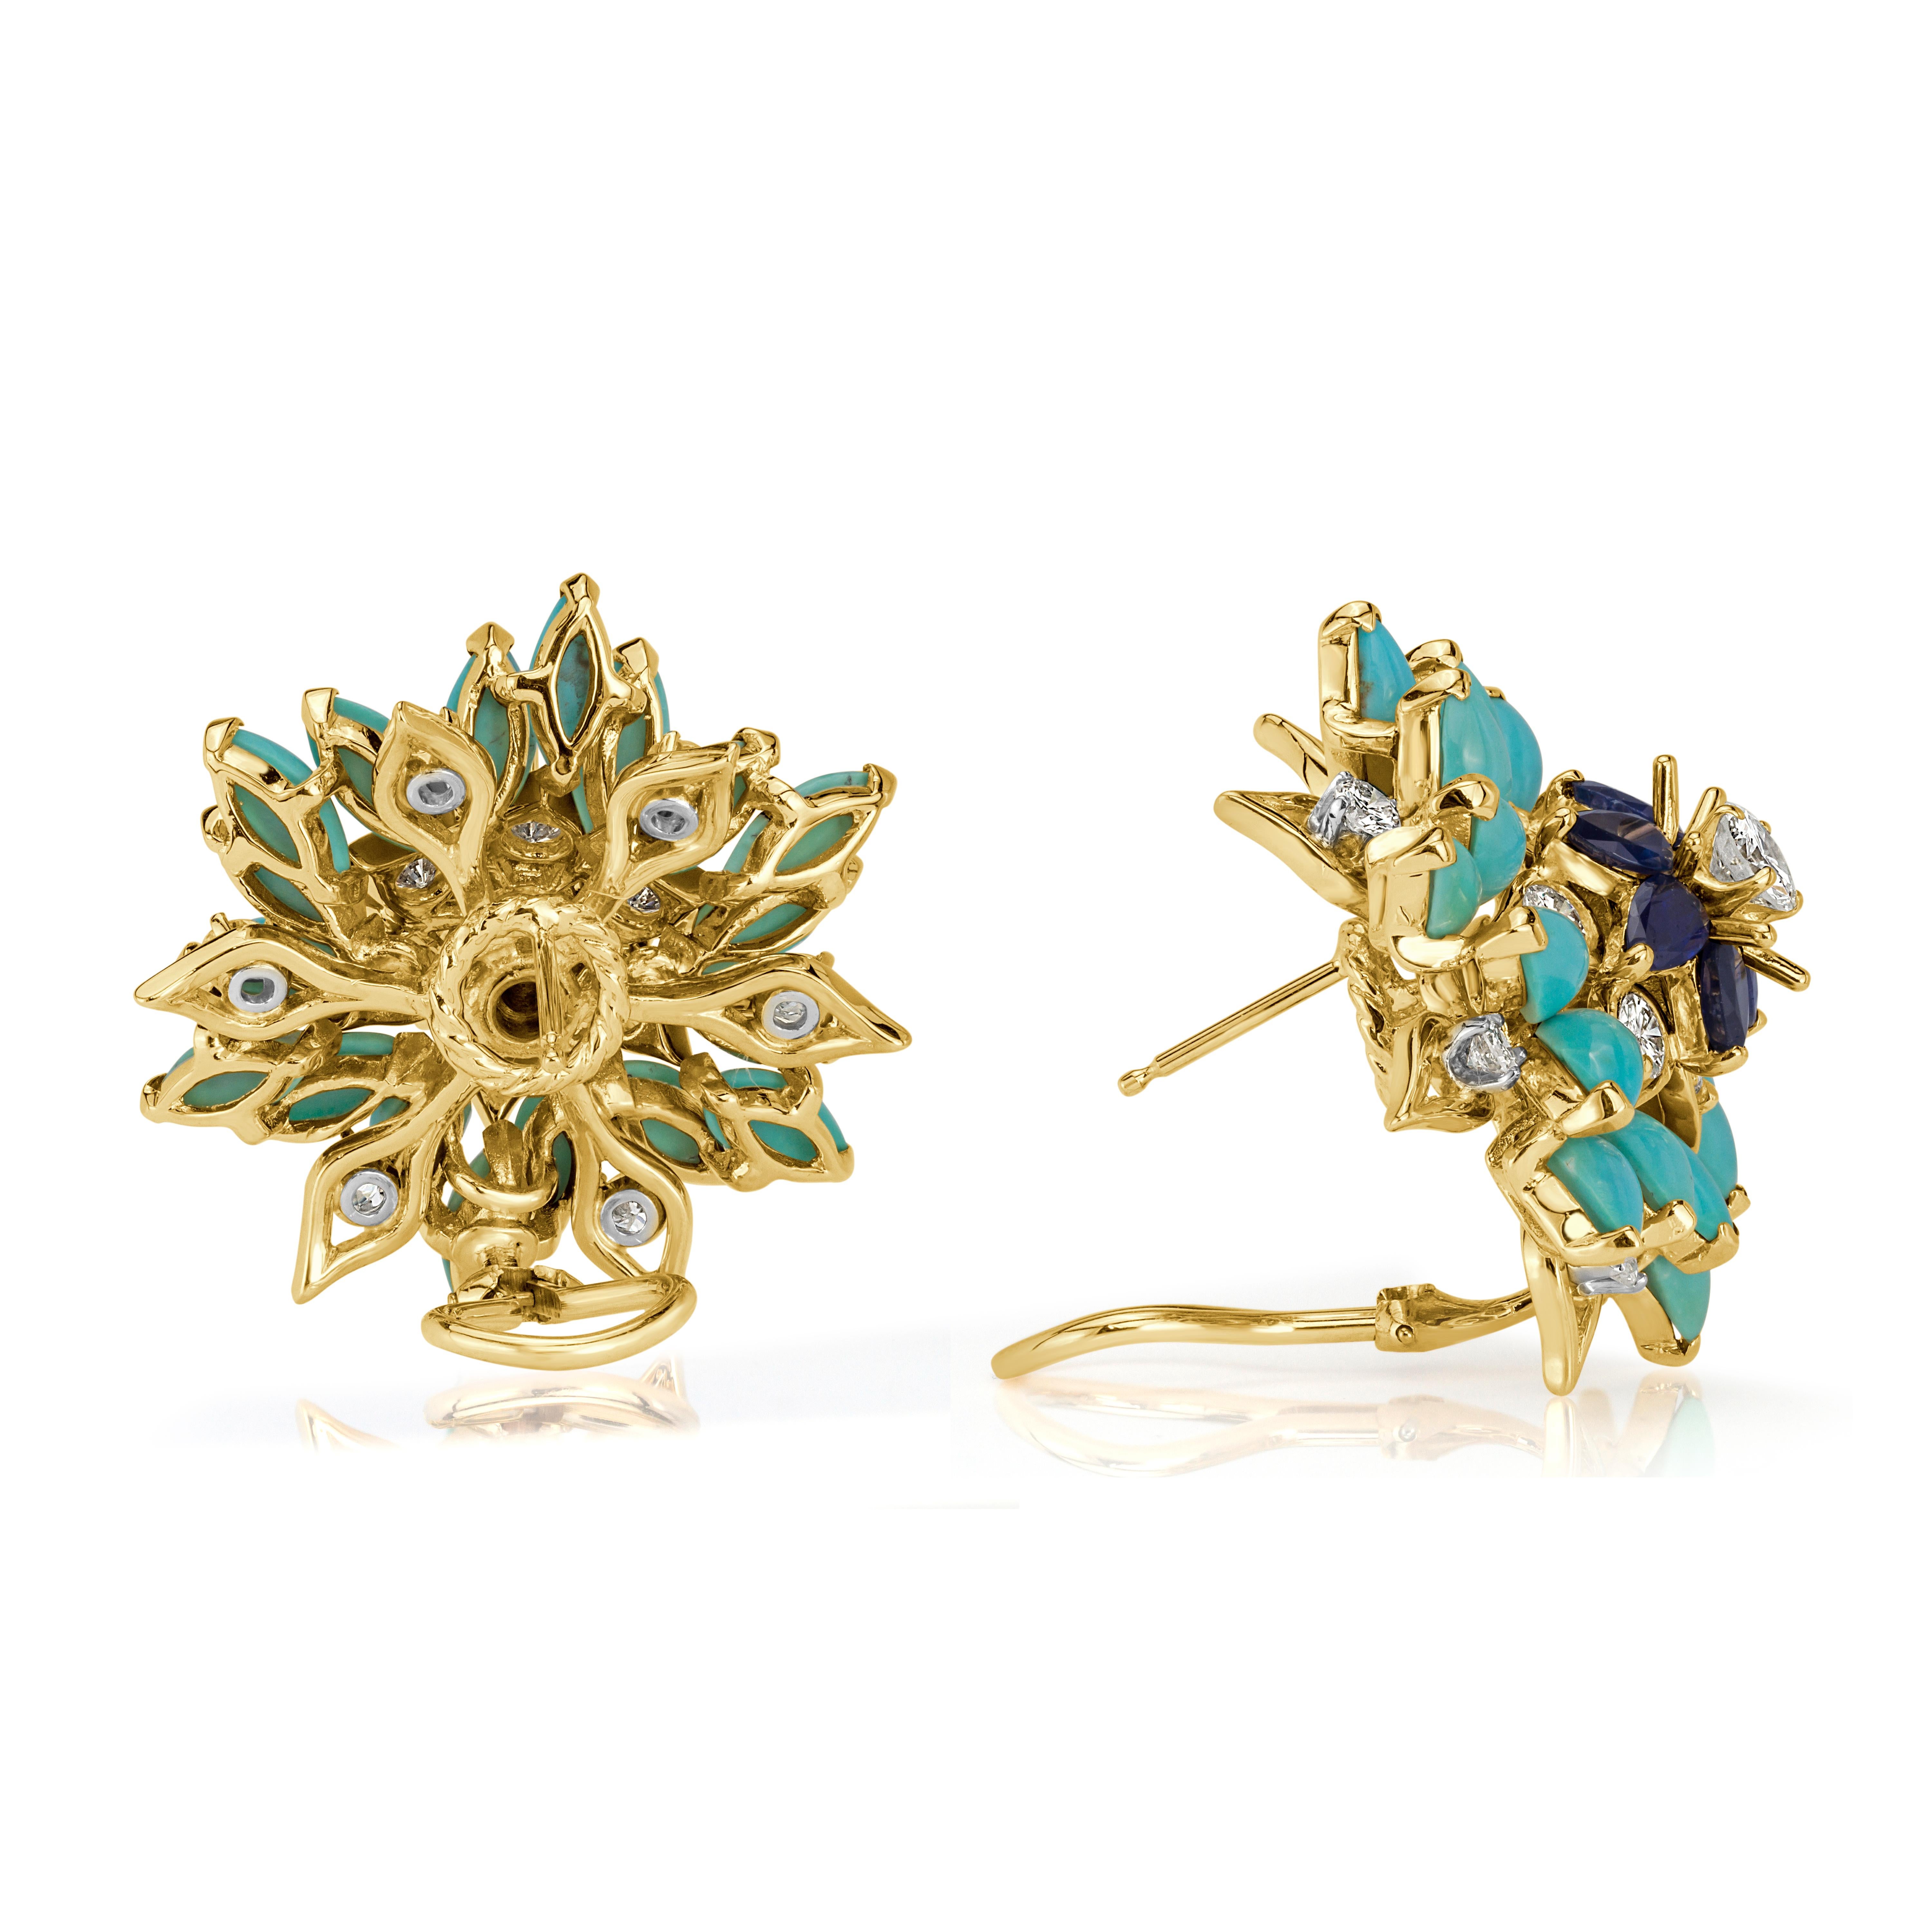 This gorgeous pair of Estate cluster earrings showcases 2.40ct of pear shaped sapphires and 2.74ct of round brilliant cut diamonds arranged in a mesmerizing floral design and complimented by exquisite turquoise beads. The diamonds are graded at F-G